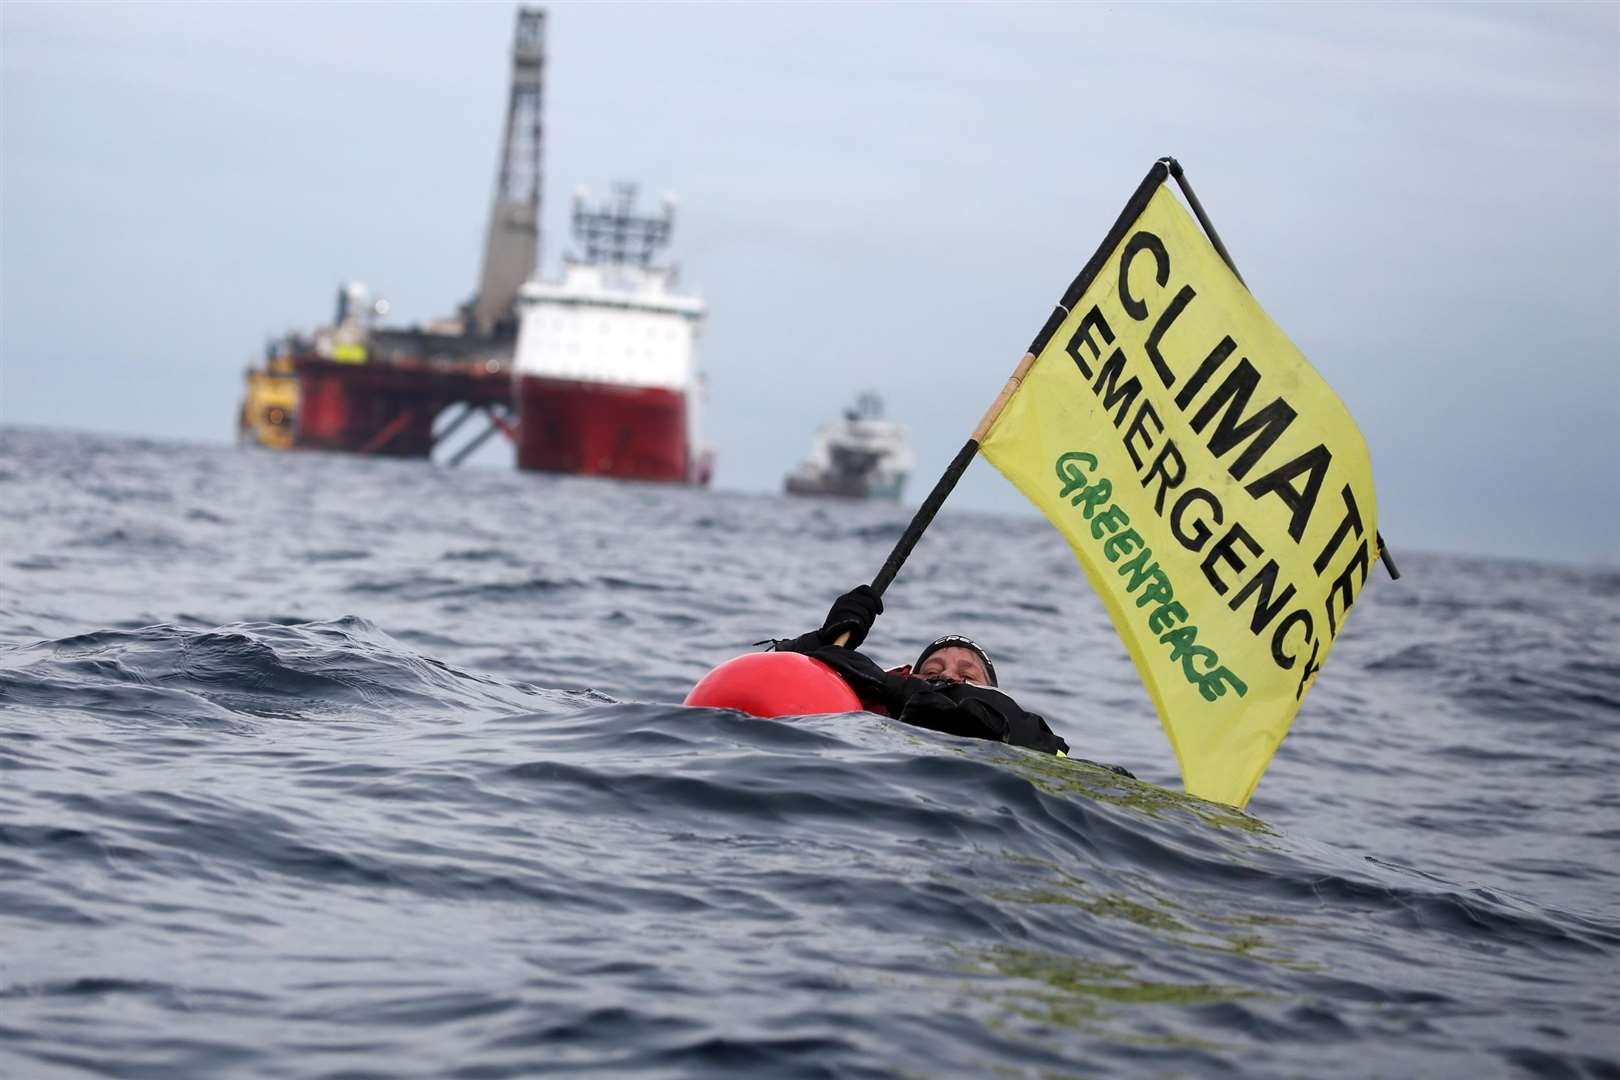 Greenpeace swimmer Sarah North holds a banner floating in front of BP rig on day 11 of the protest in the North Sea.